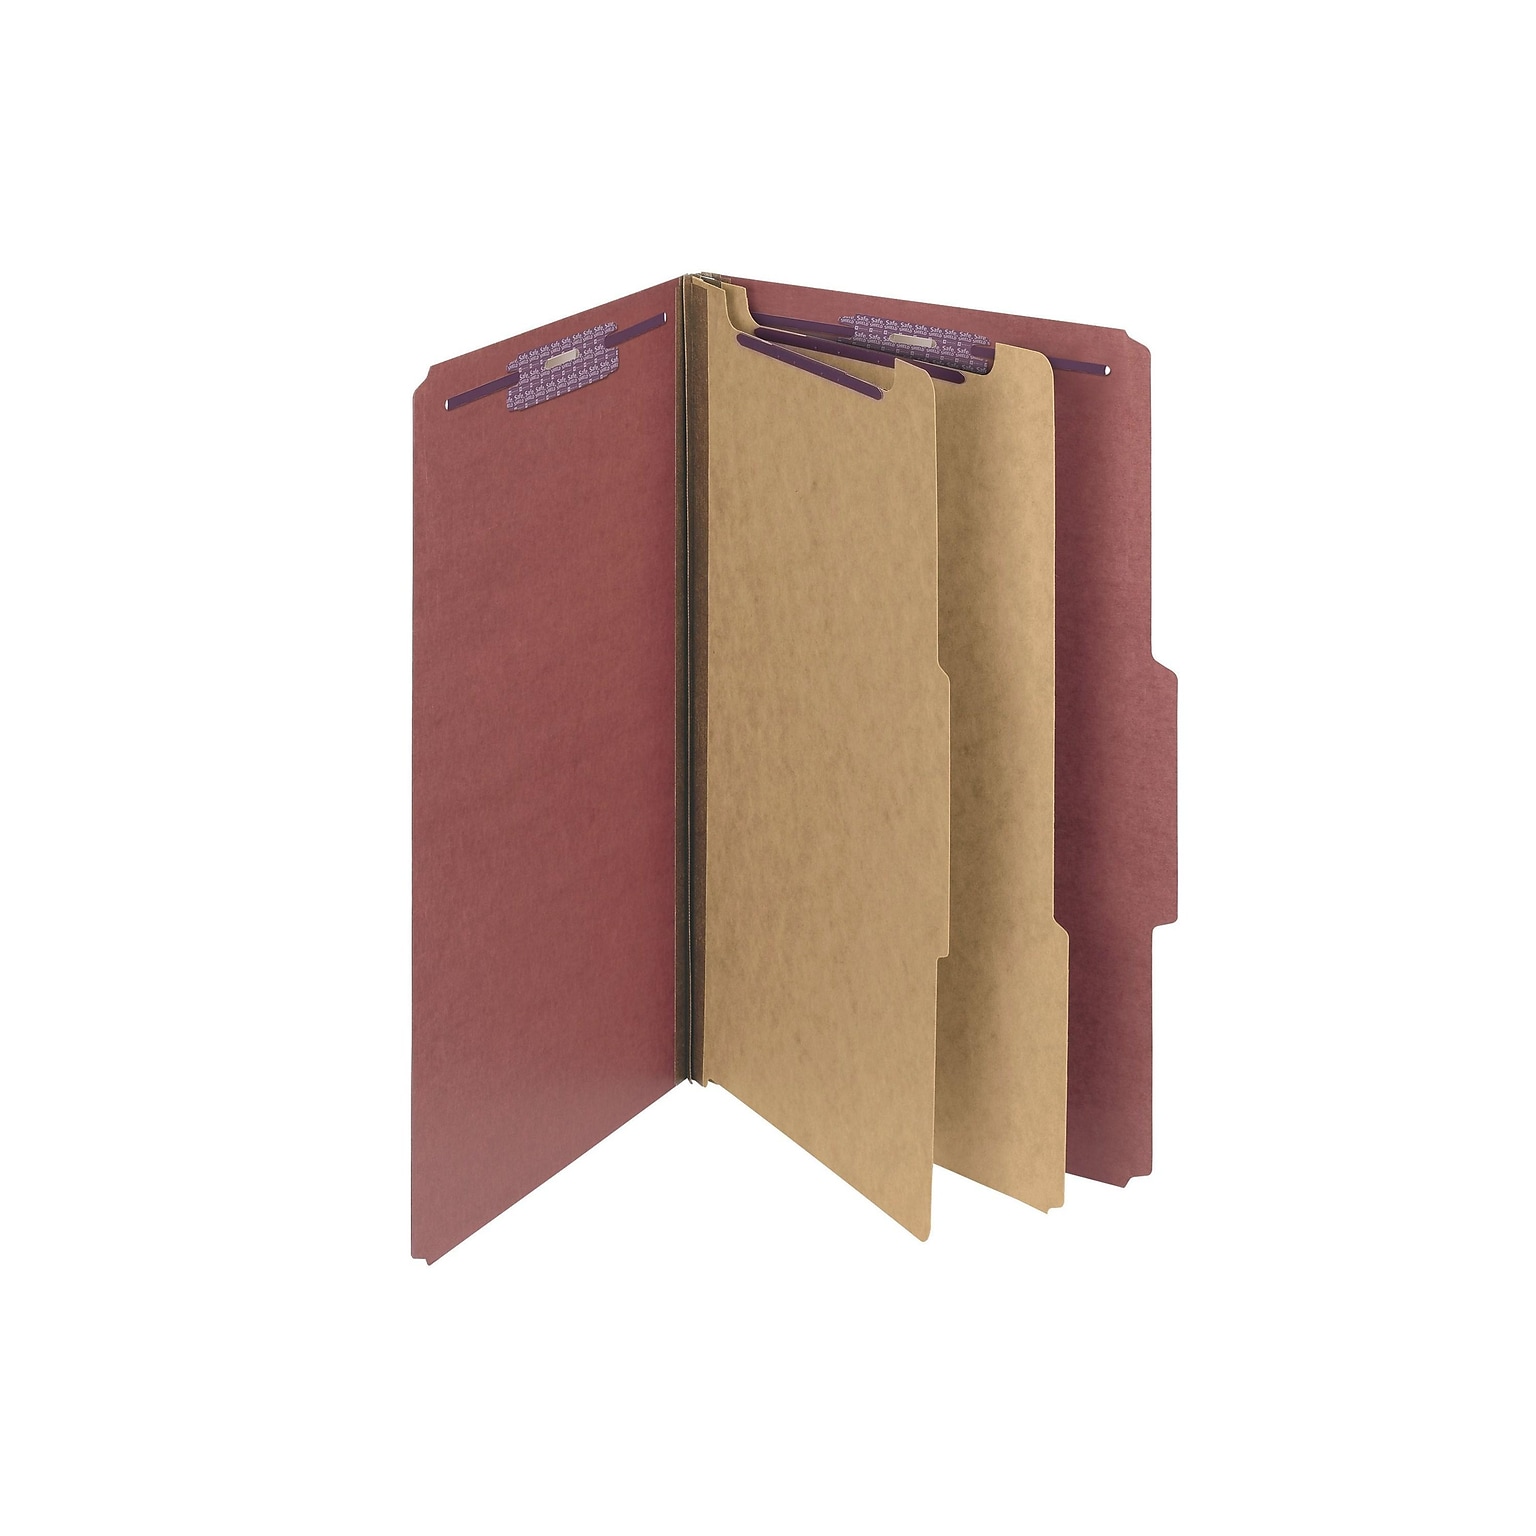 Smead Pressboard Classification Folders, 2 Expansion, Legal Size, 2 Dividers, Red, 10/Box (19075)